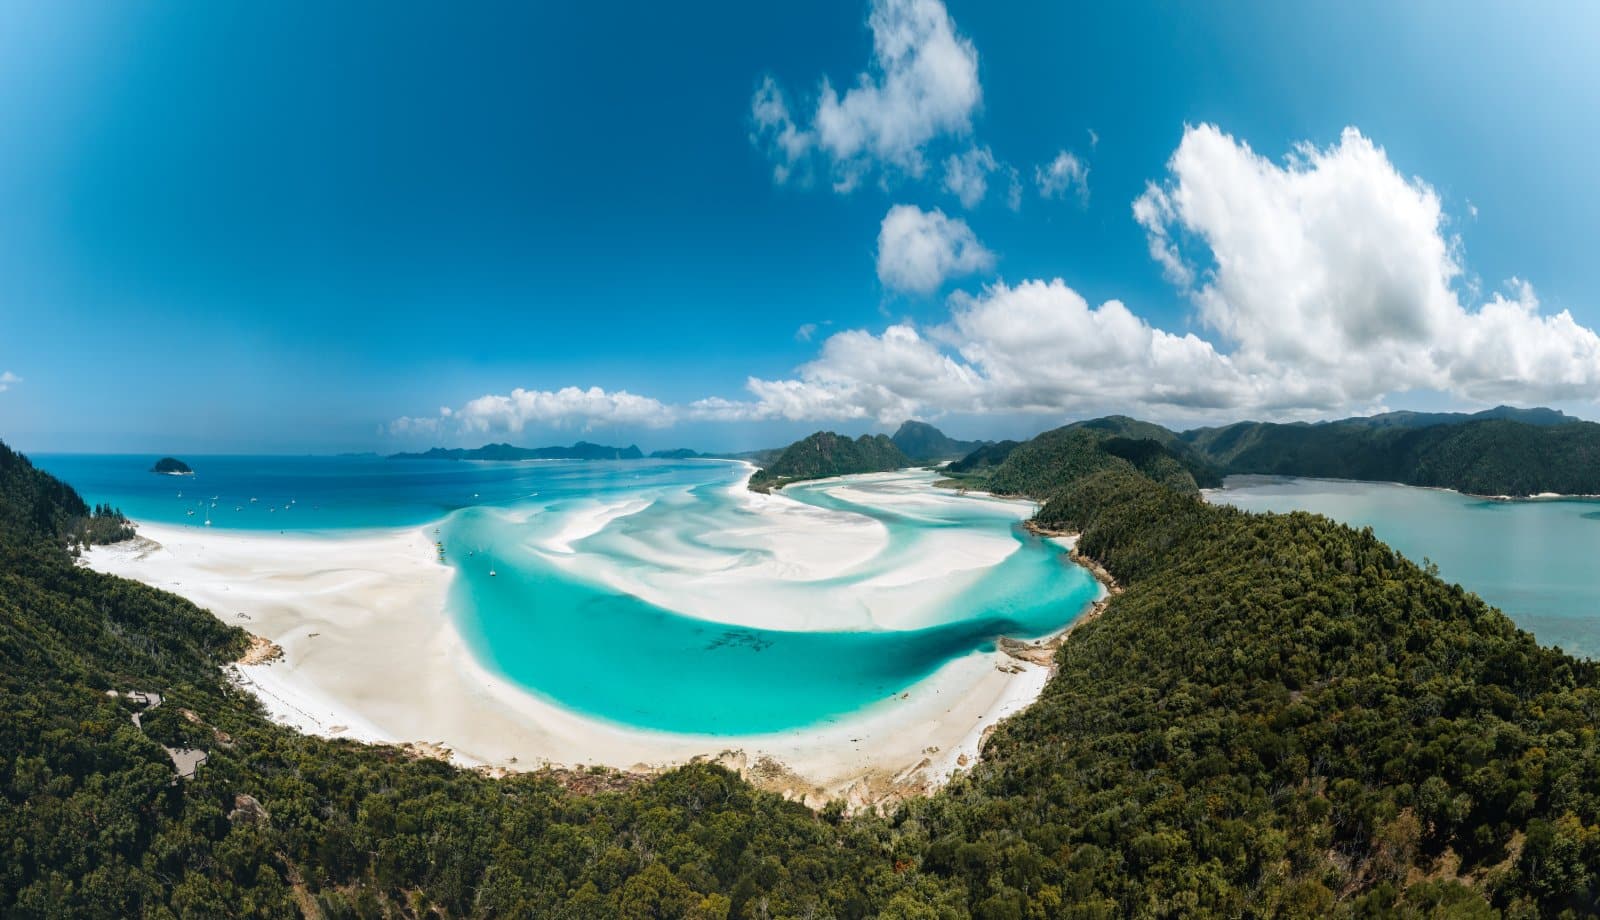 <p class="wp-caption-text">Image Credit: Shutterstock / Mathias Berlin</p>  <p><span>Nestled in the heart of the Great Barrier Reef, the Whitsunday Islands are a collection of 74 idyllic islands offering some of the world’s most beautiful beaches, including the famed Whitehaven Beach. The Whitsundays are a paradise for sailing, snorkeling, and diving, with crystal-clear waters and abundant marine life. Visitors can explore the islands through day trips, overnight sailing adventures, or by staying on one of the few inhabited islands. The region is a hub for aquatic activities and a gateway to the Great Barrier Reef, providing opportunities for coral viewing and underwater photography.</span></p>